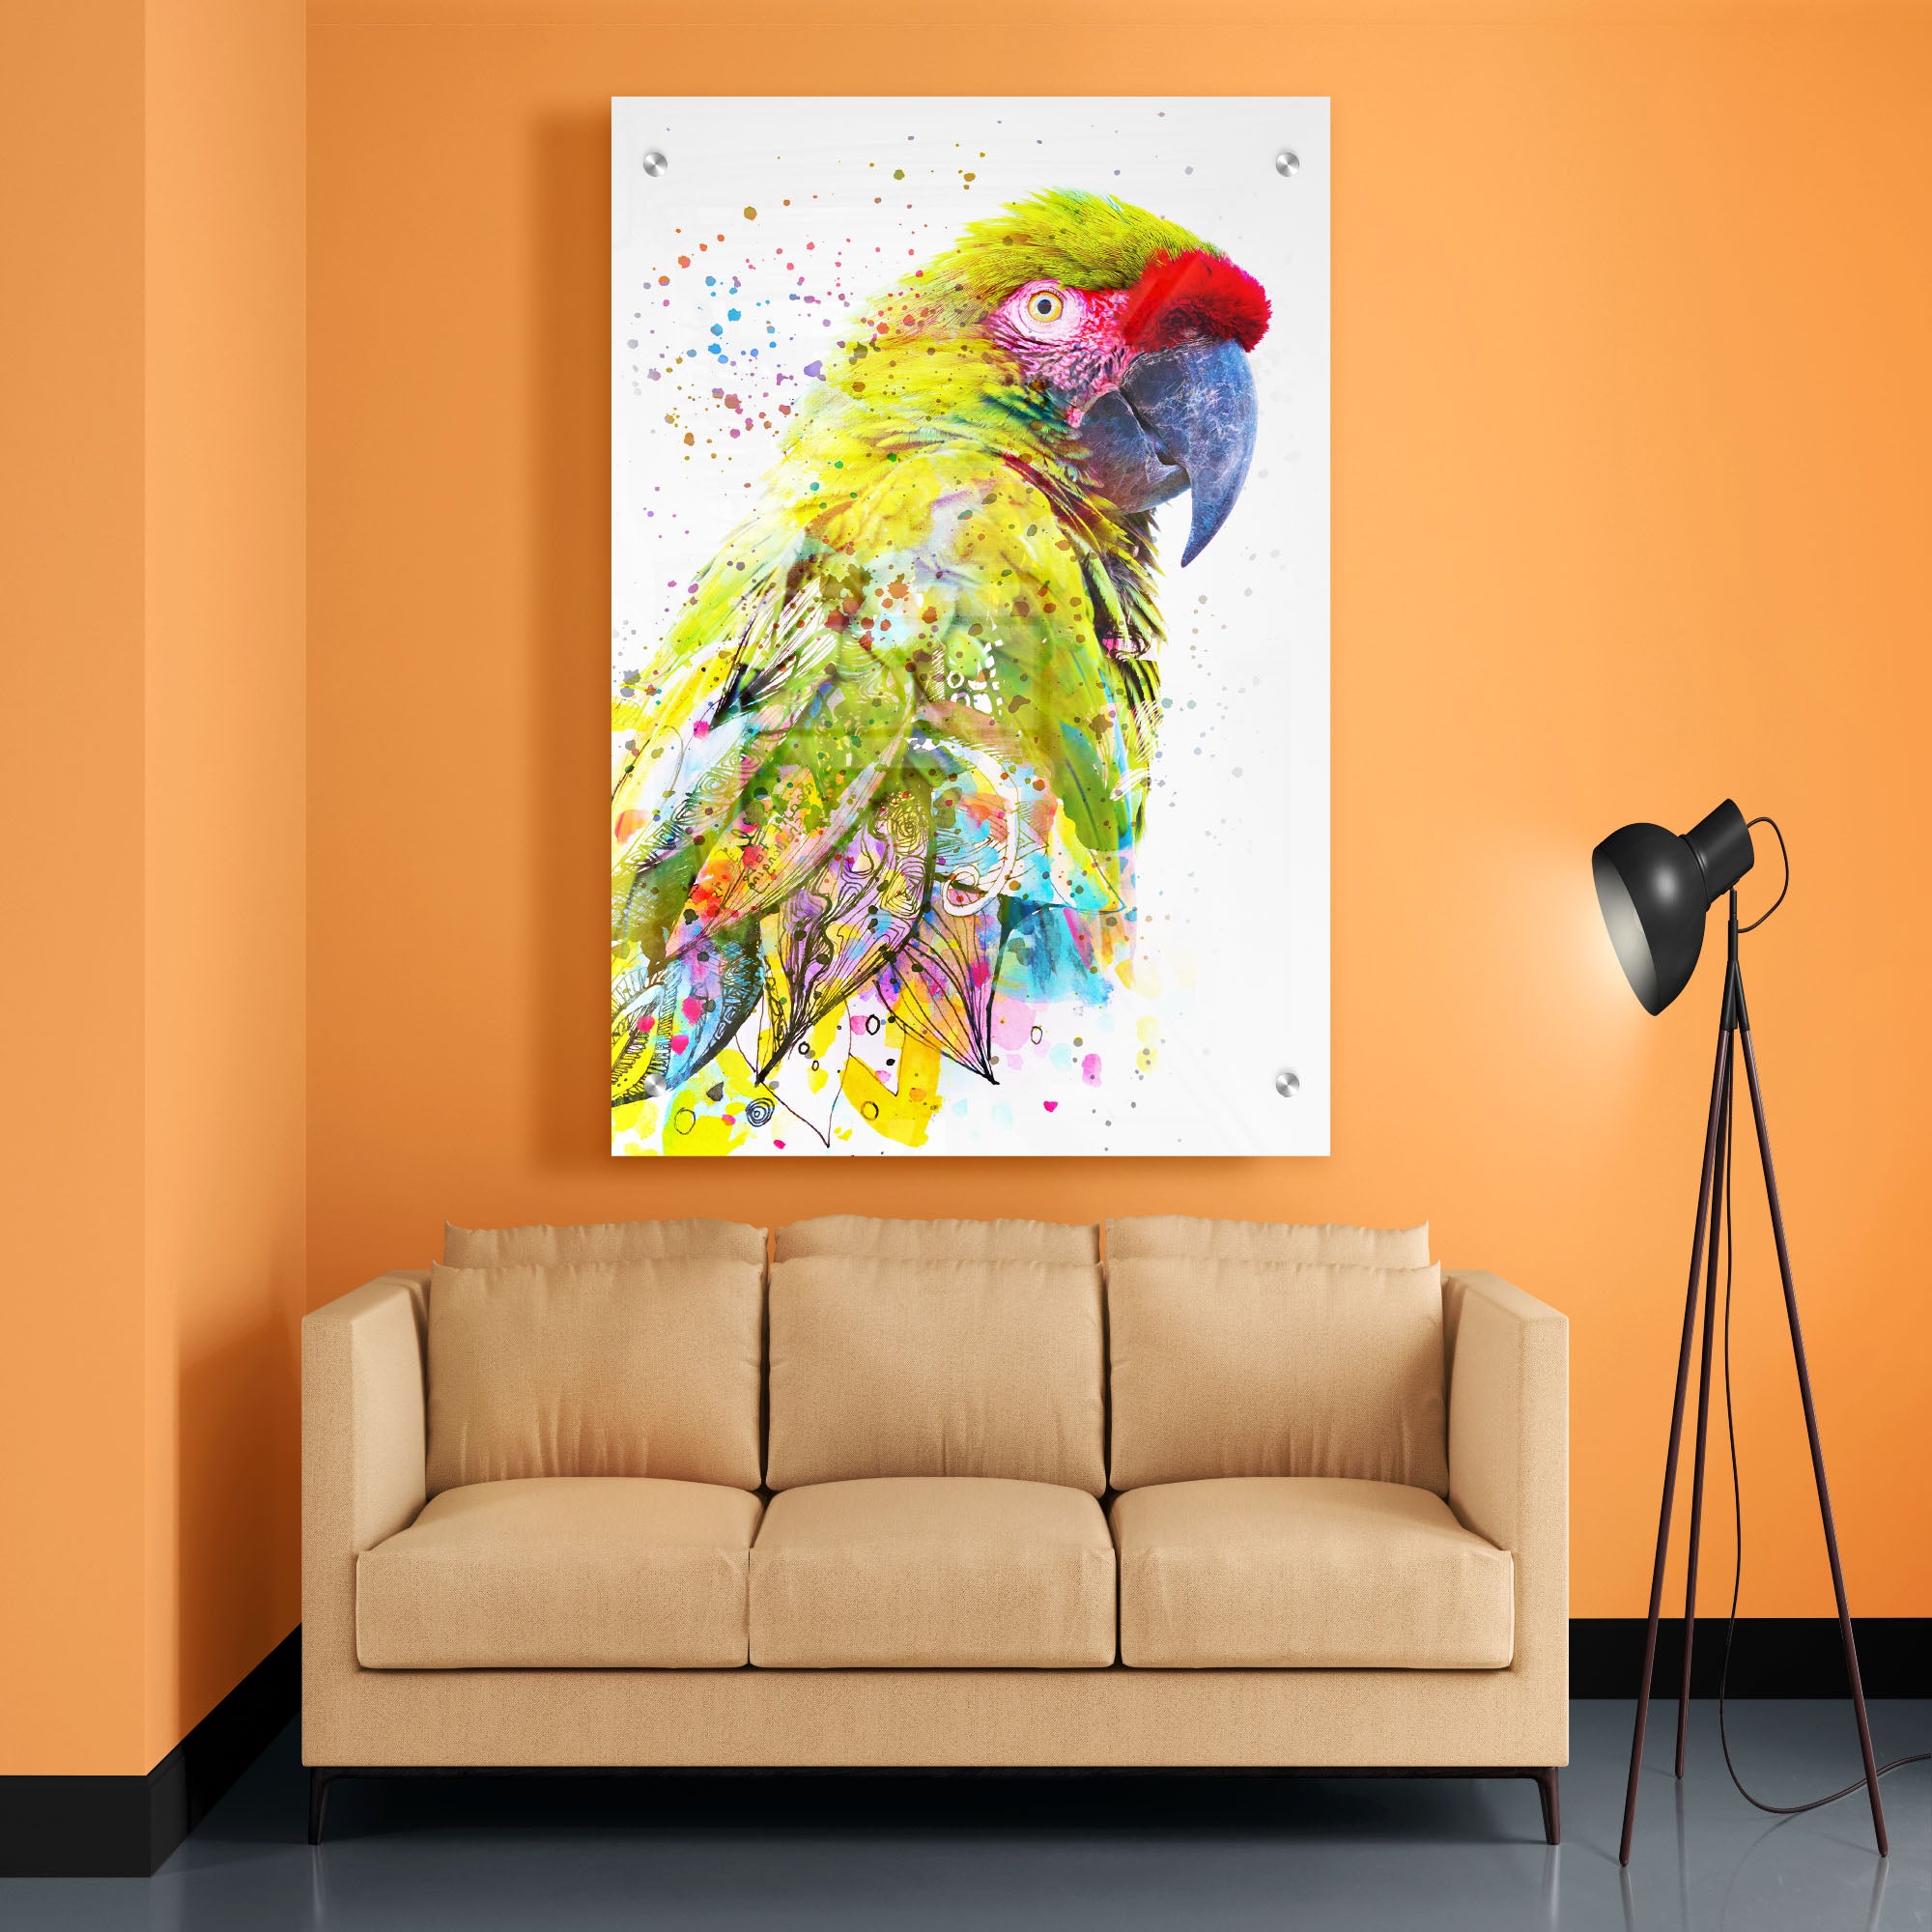 Colourful Parrot Wall Art Acrylic Wall Painting